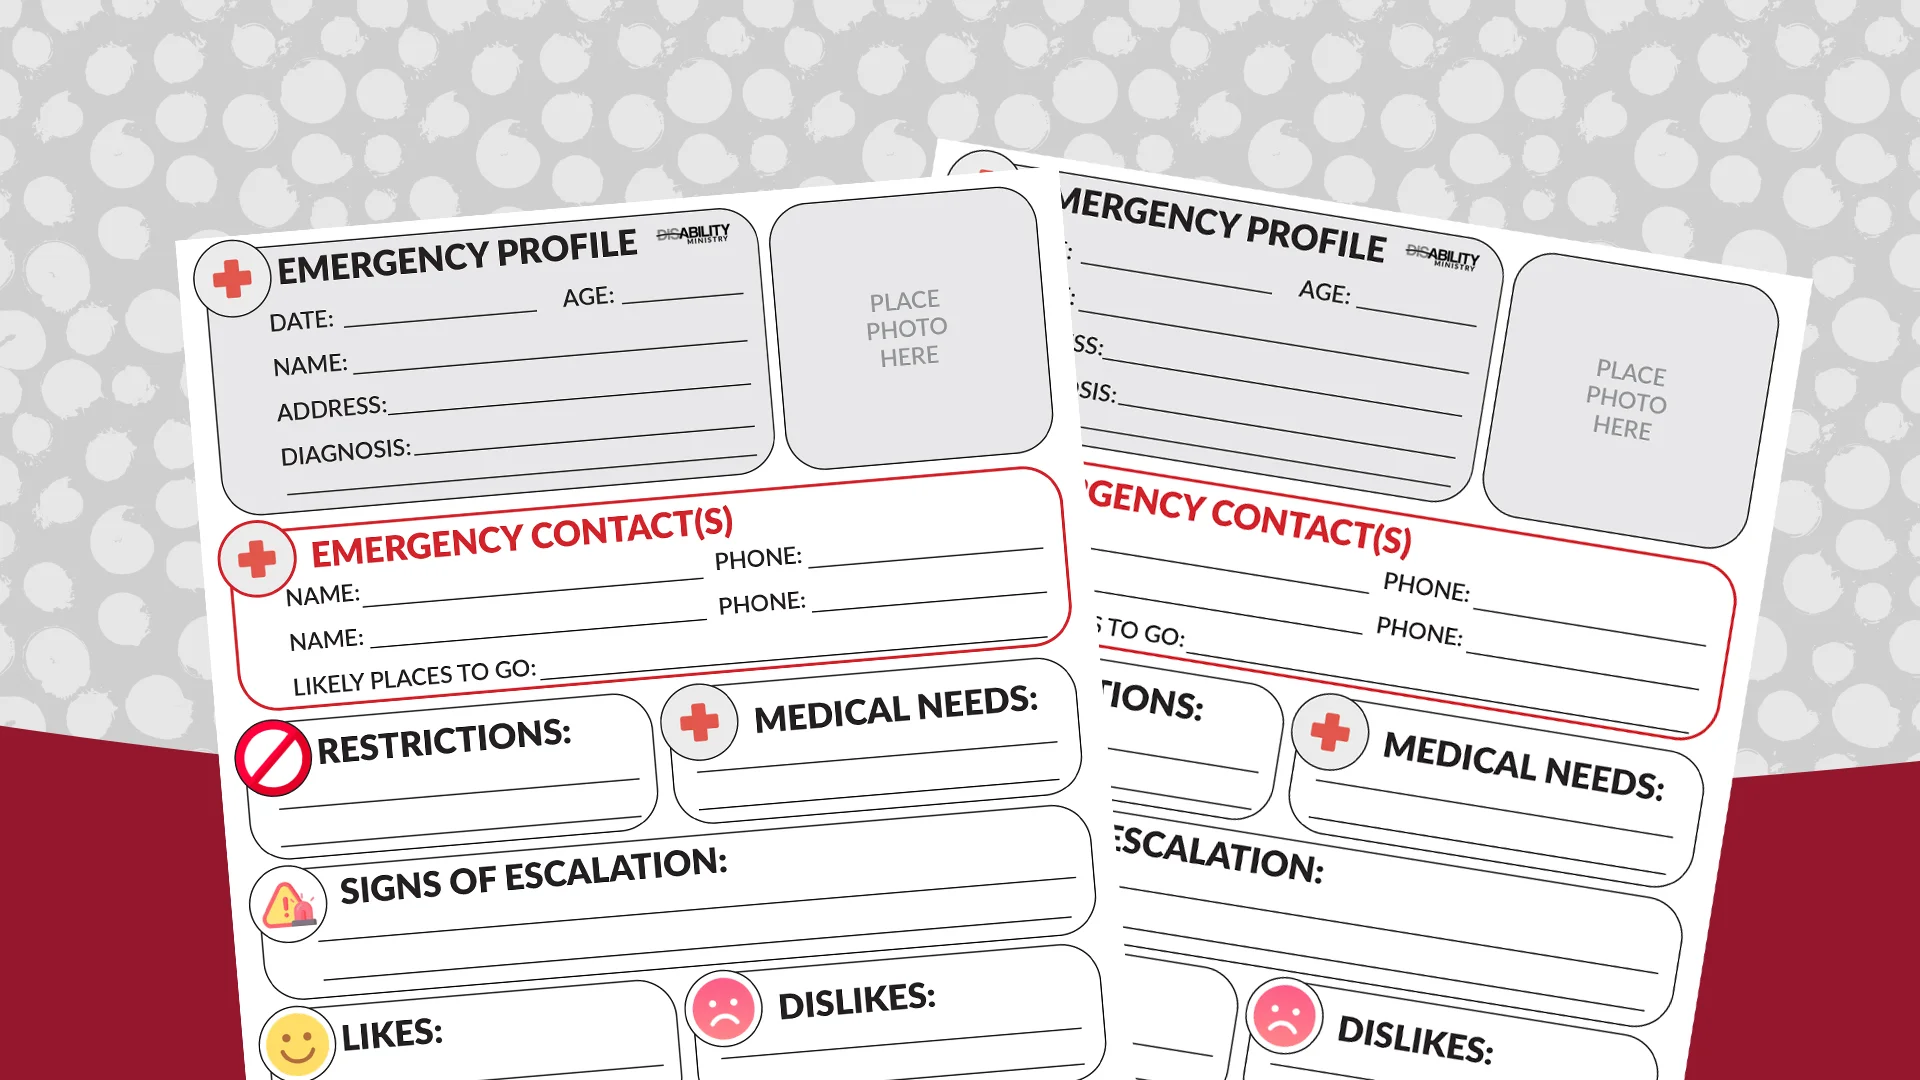 Product image for Emergency Profile Form